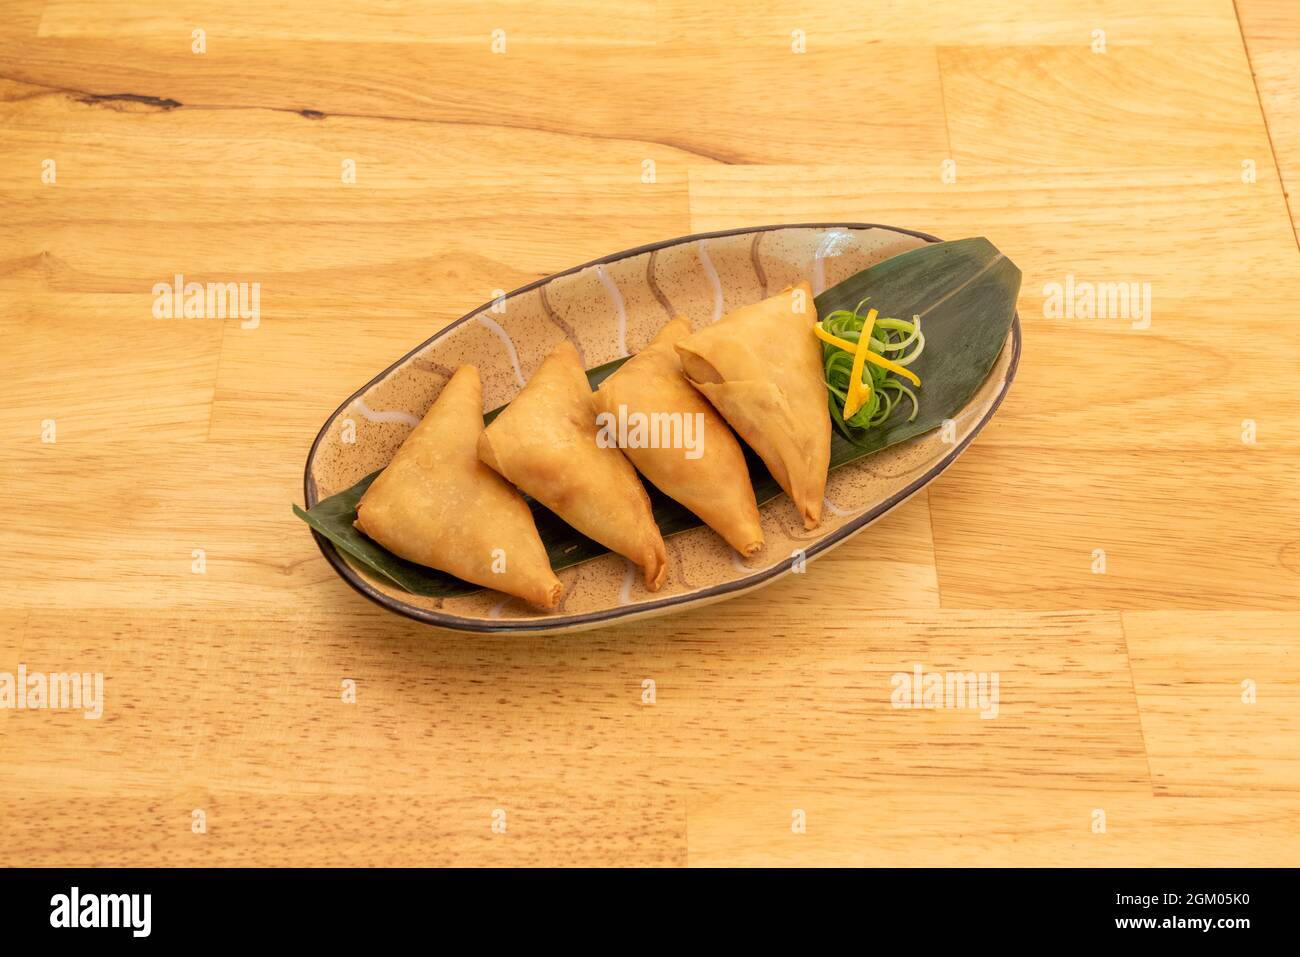 Tray of vegetable samosa cooked in Pakistani restaurant on banana leaf and oak table Stock Photo